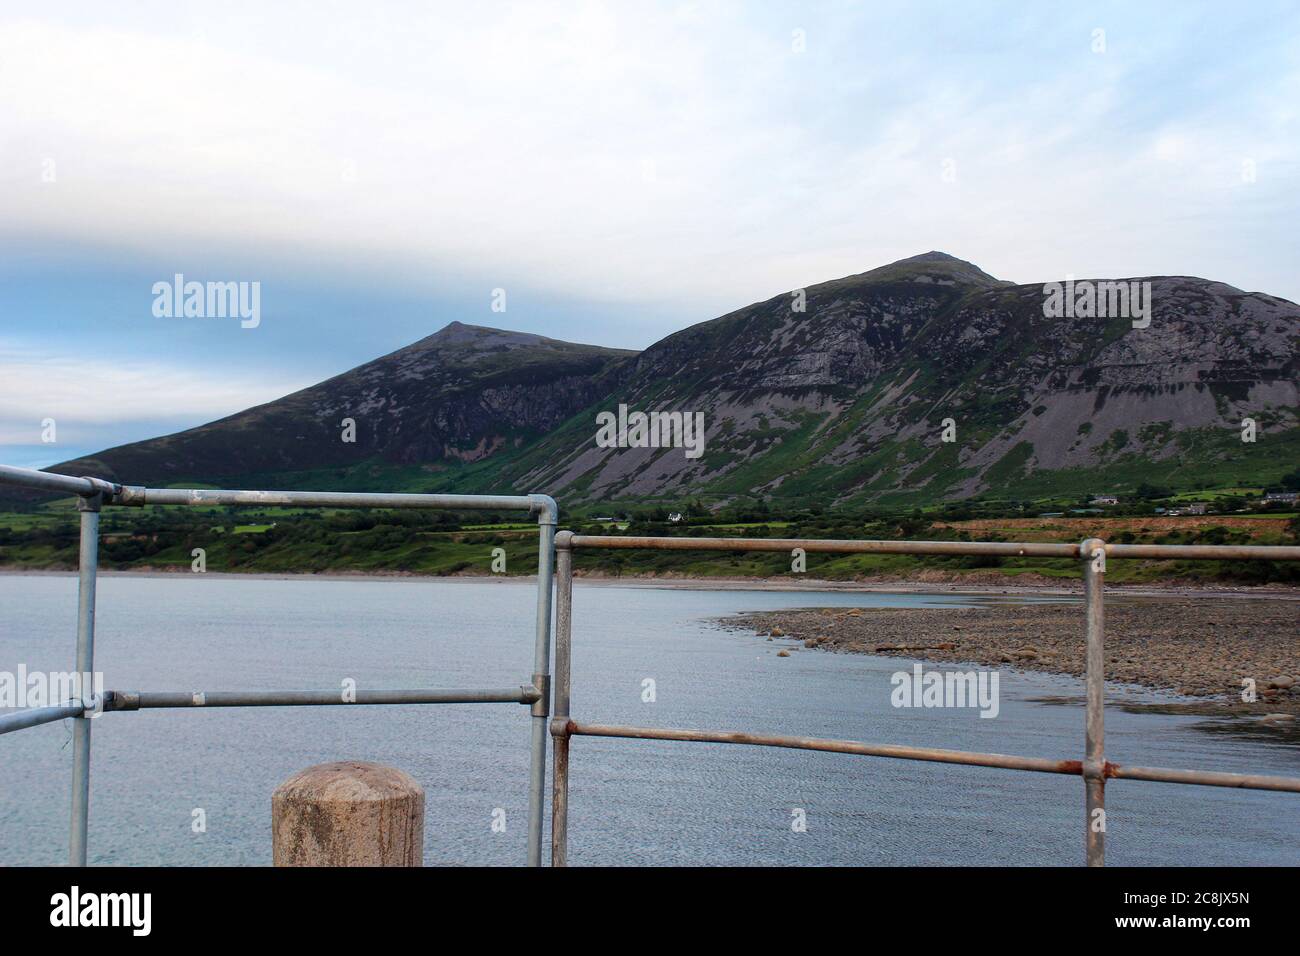 View of the Rivals mountains (Yr Eifl) from a pier/sea walkway, inc the barriers, at Trefor, North Wales Stock Photo